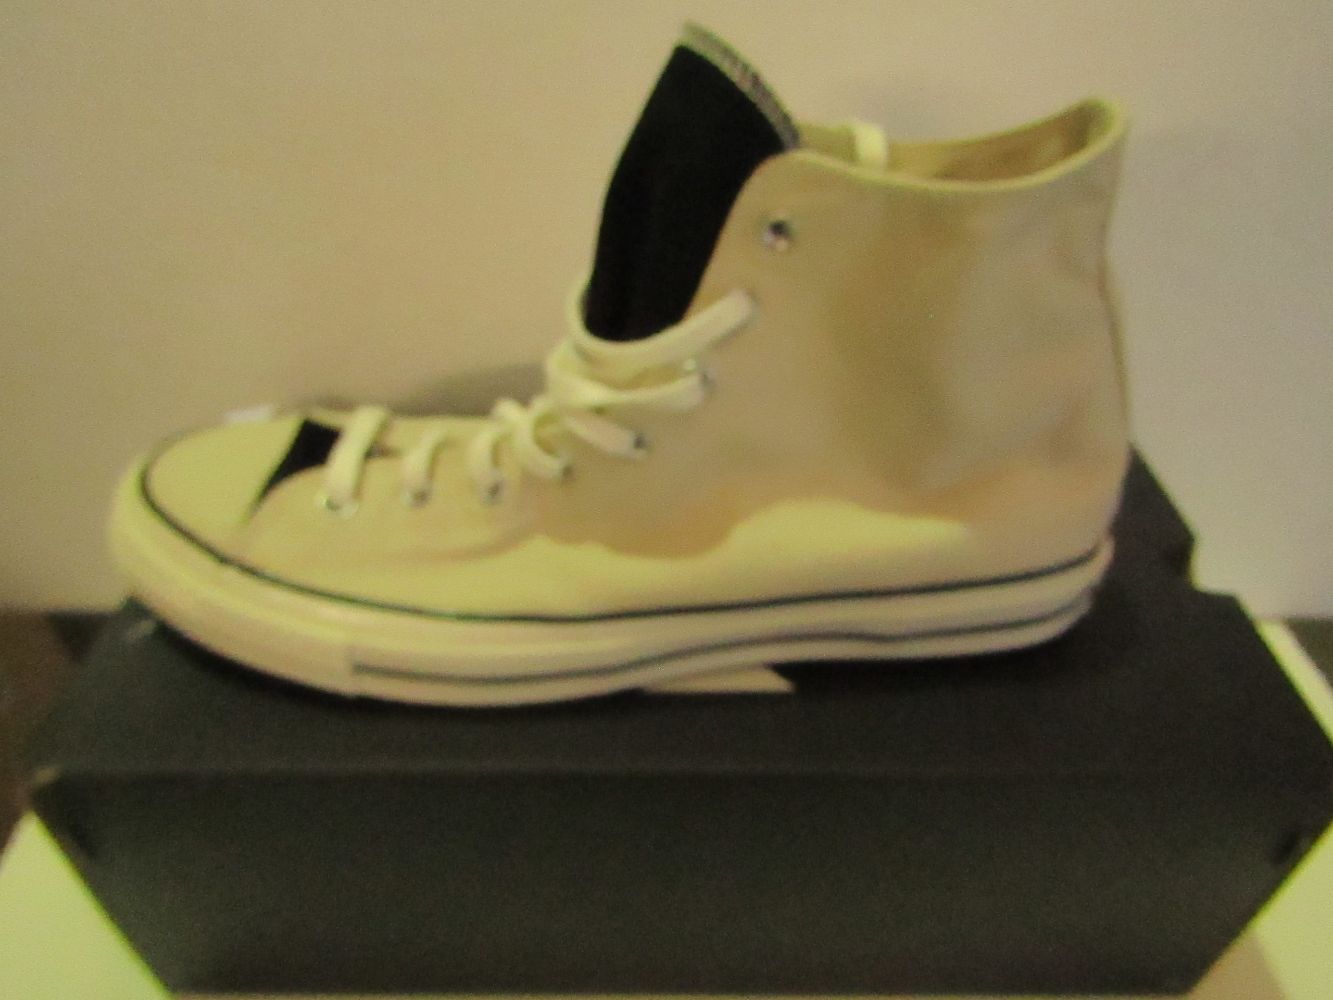 Converse Allstars trainers in a range of sizes and styles.